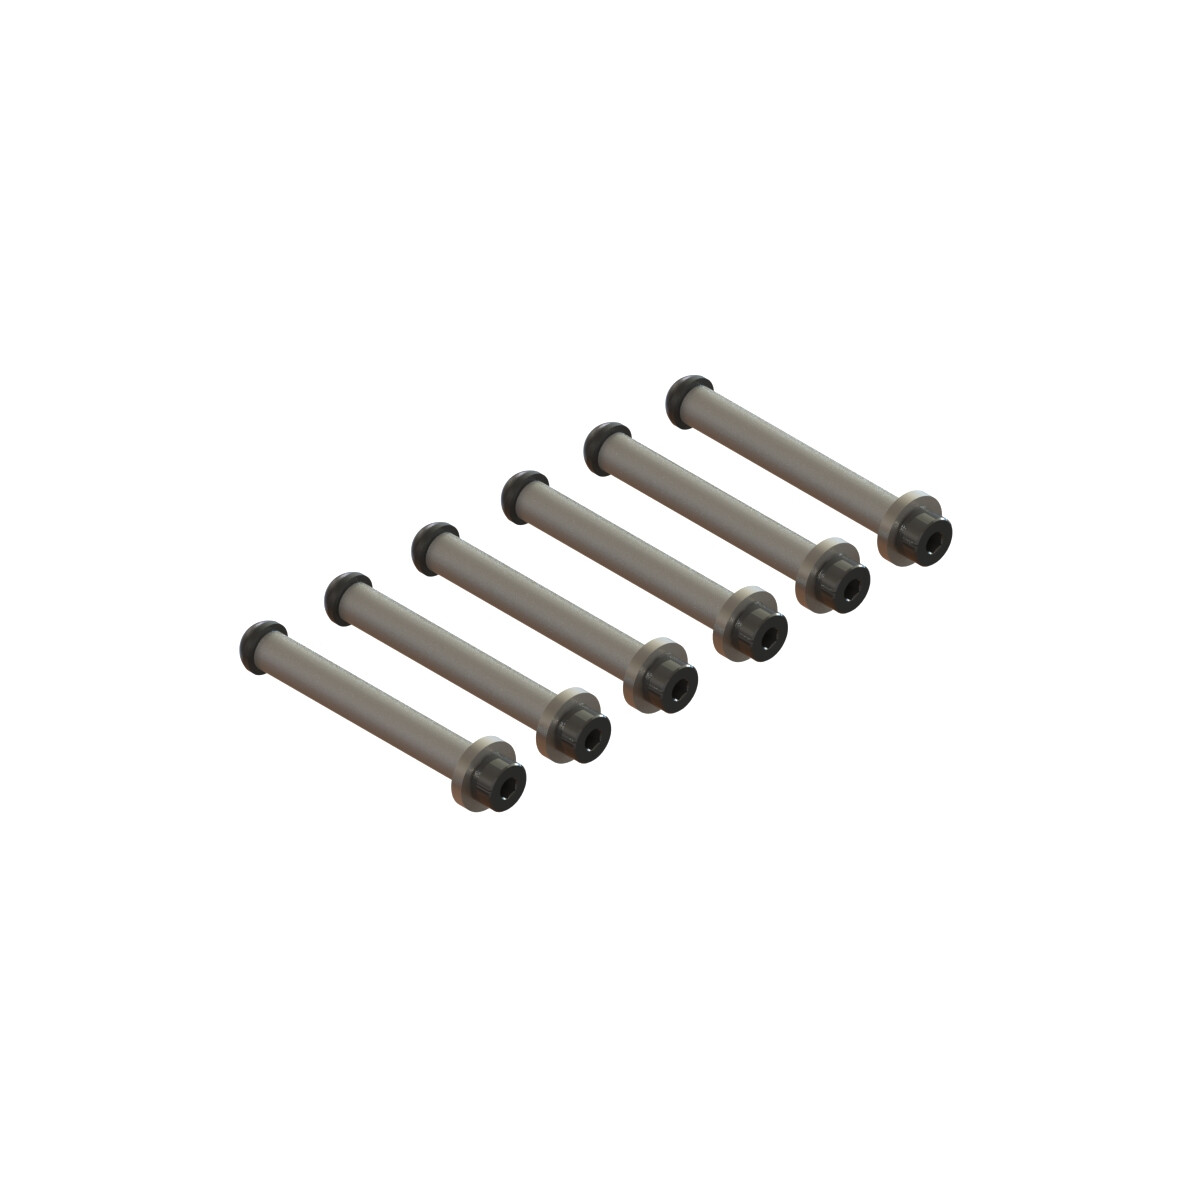 Qube Spindle Shaft only, set - 6 pc